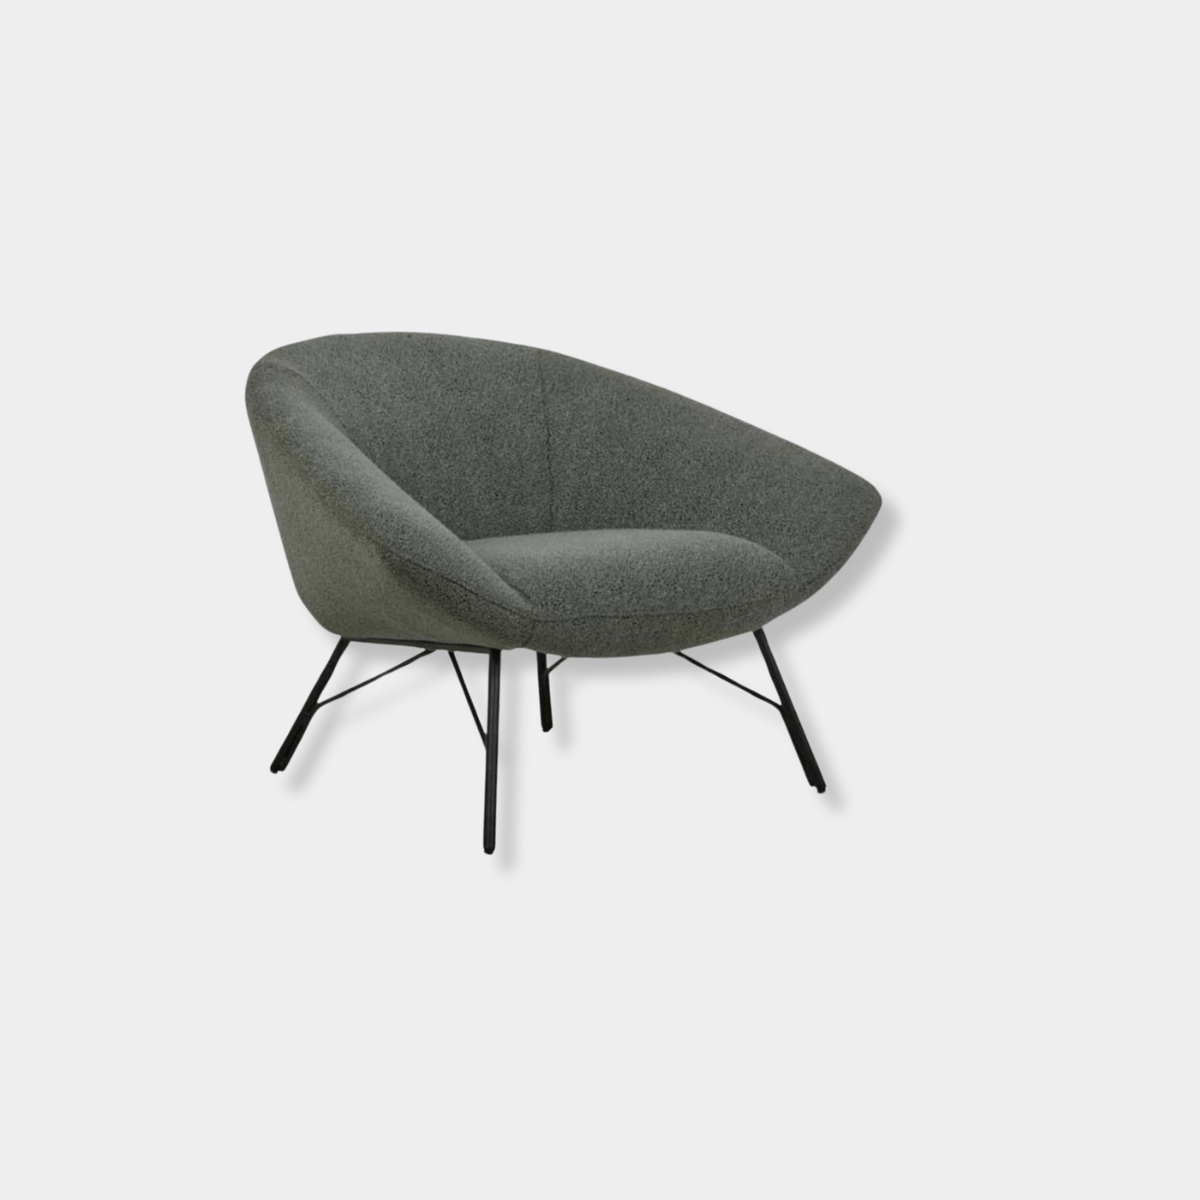 Globe West Occasional Chairs Globe West Felix Angled Arm Occasional Chair, Sage Boucle